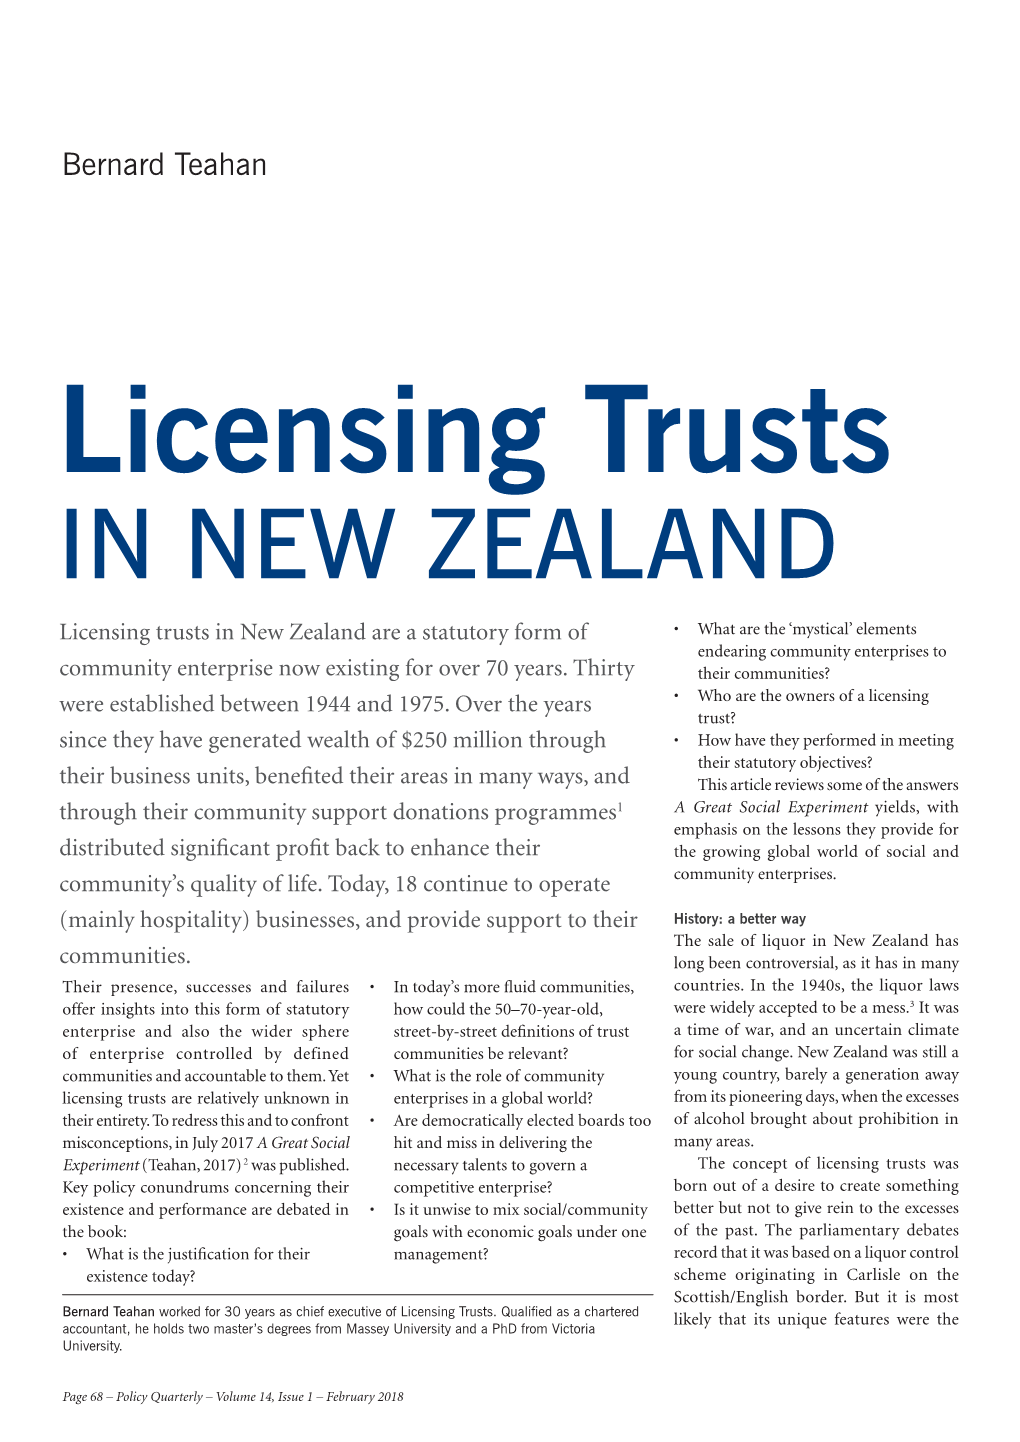 Licensing Trusts in New Zealand